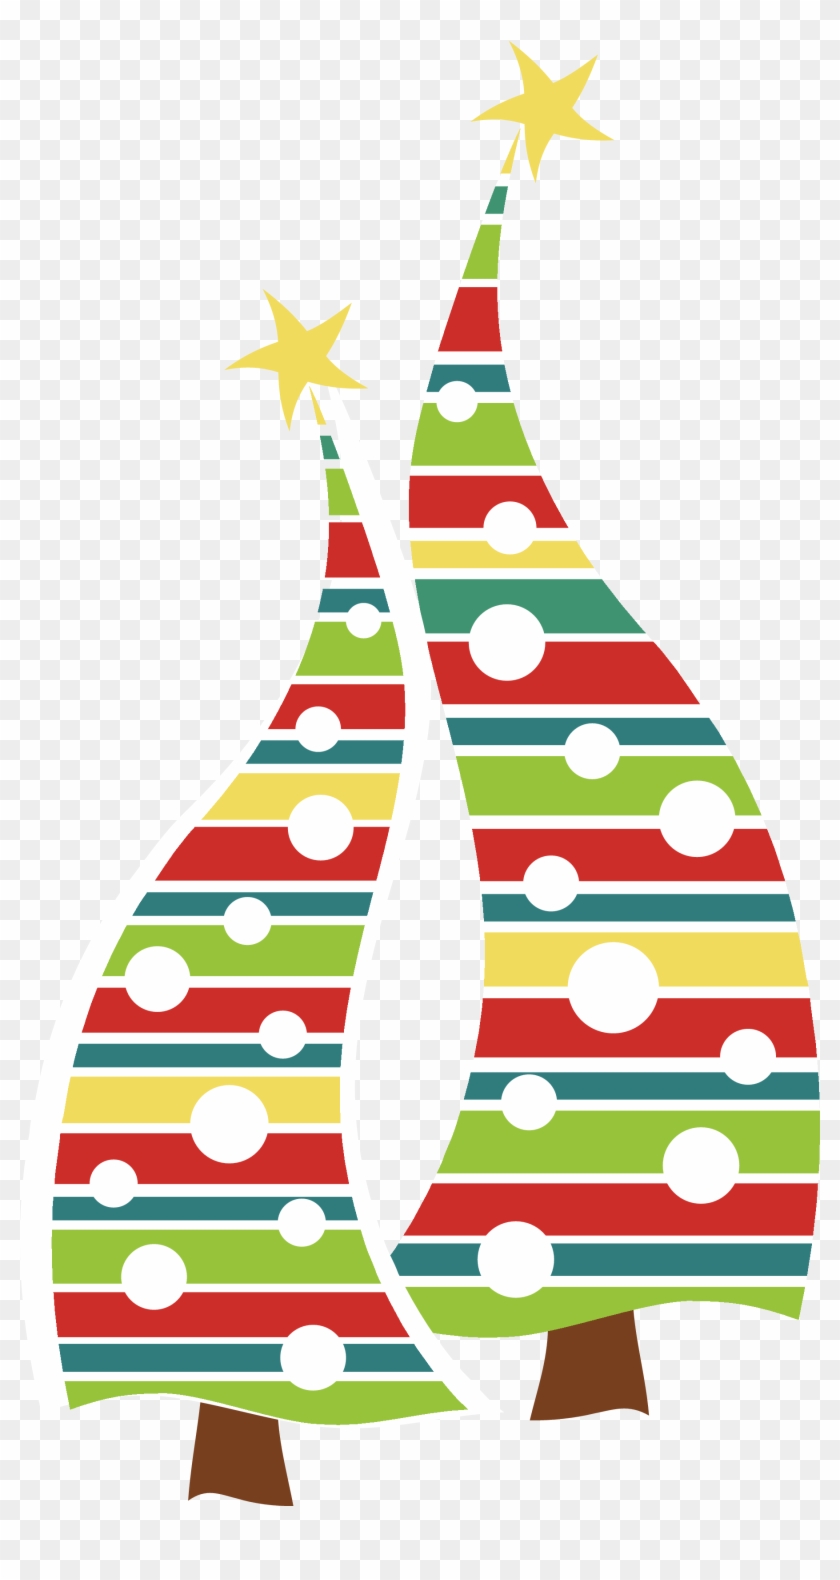 Bring Along A Friend Or Two - Whimsical Christmas Tree Clip Art Free #529852